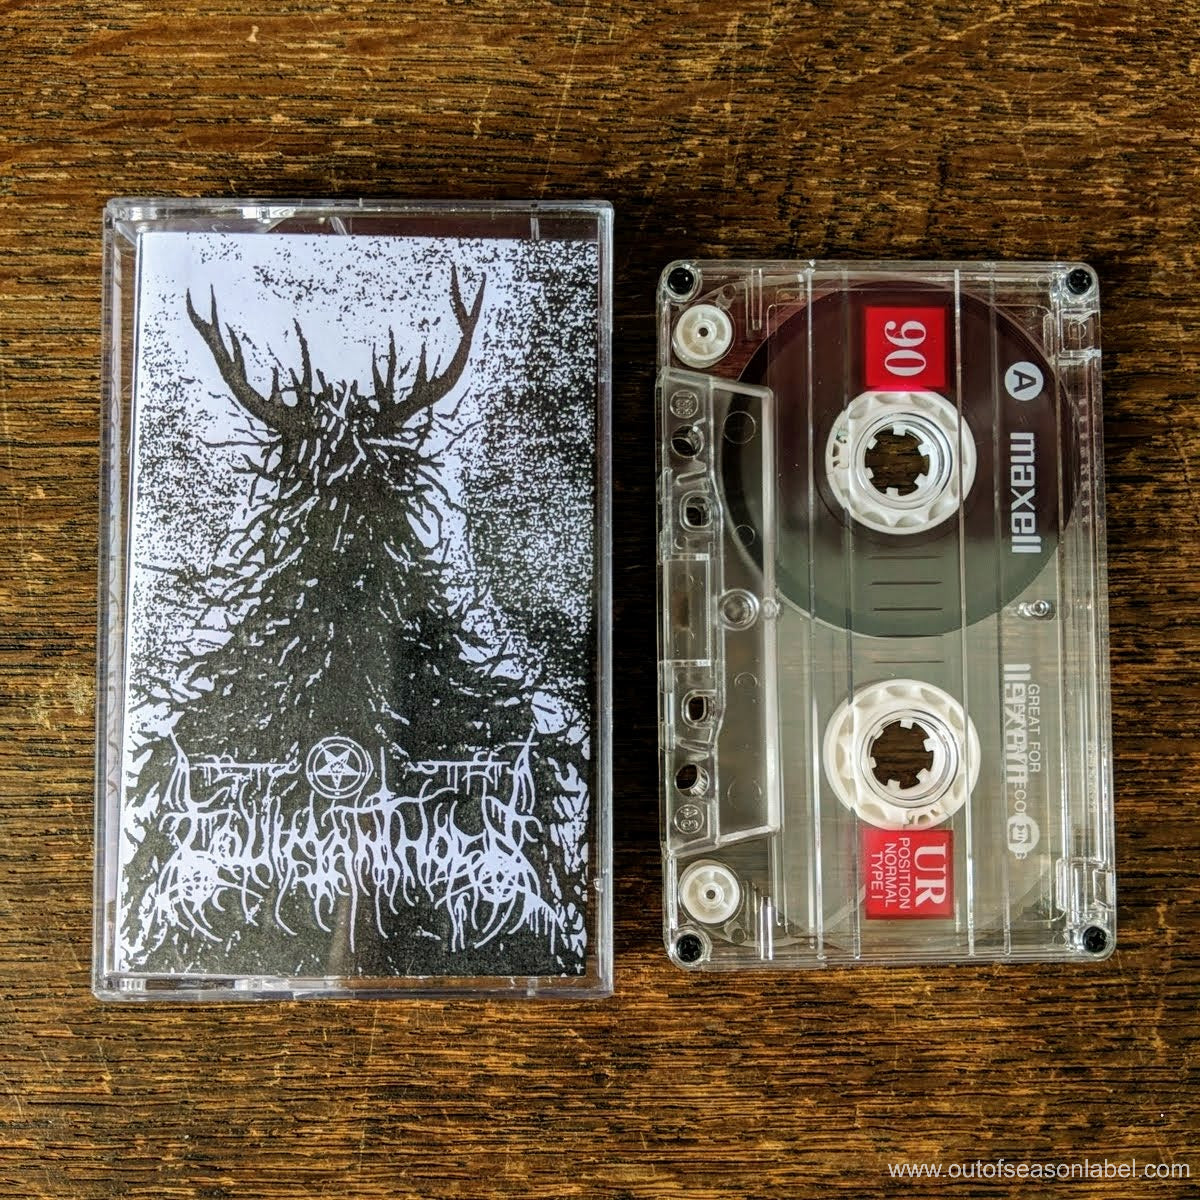 [SOLD OUT] EQUIMANTHORN "Entrance to the Ancient Flame" (1992) Cassette Tape